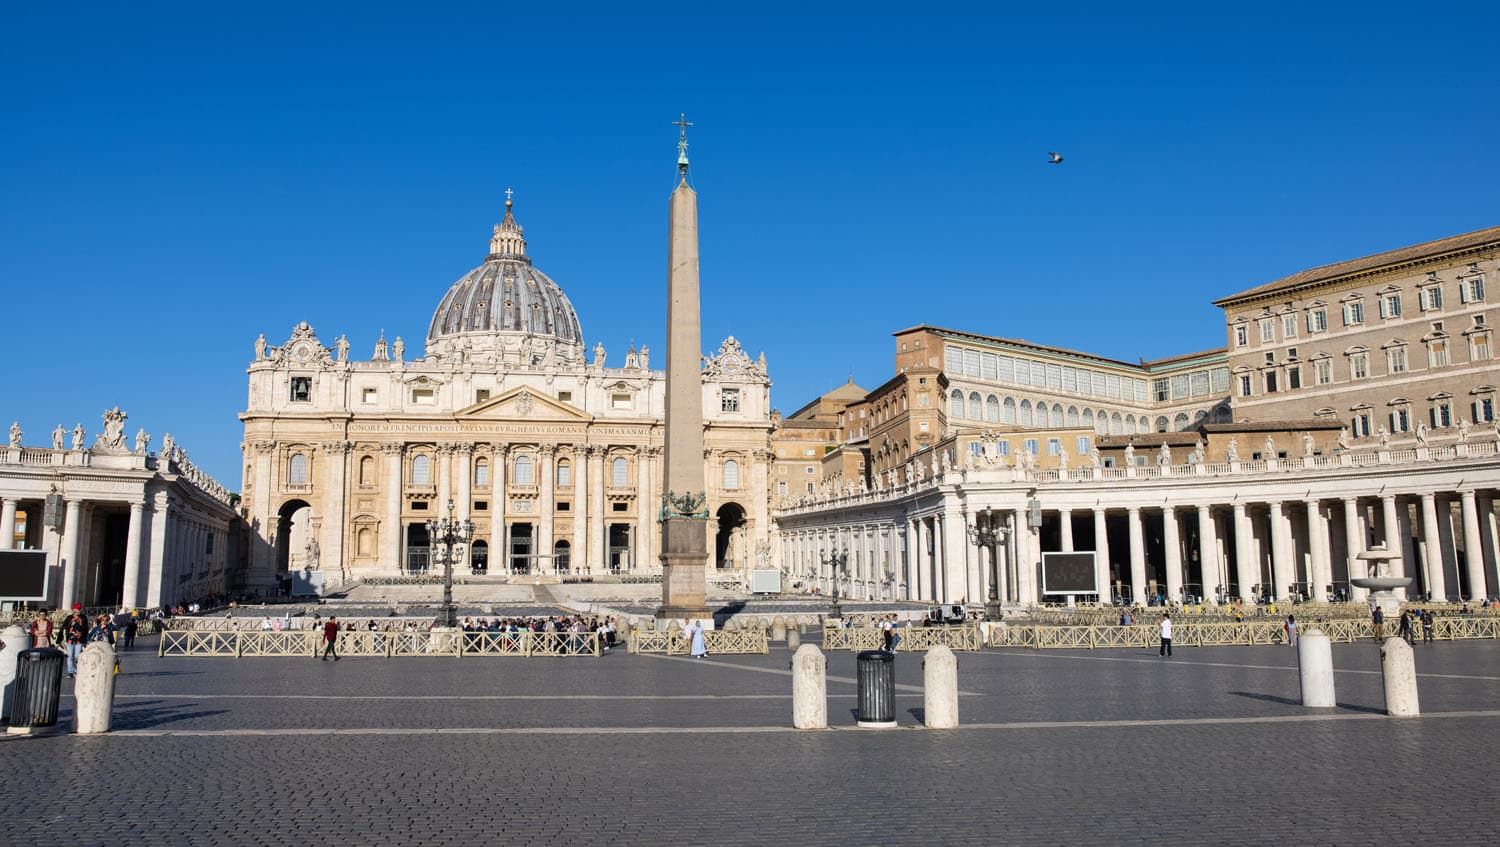 St Peters Square Rome | Best things to do in Rome